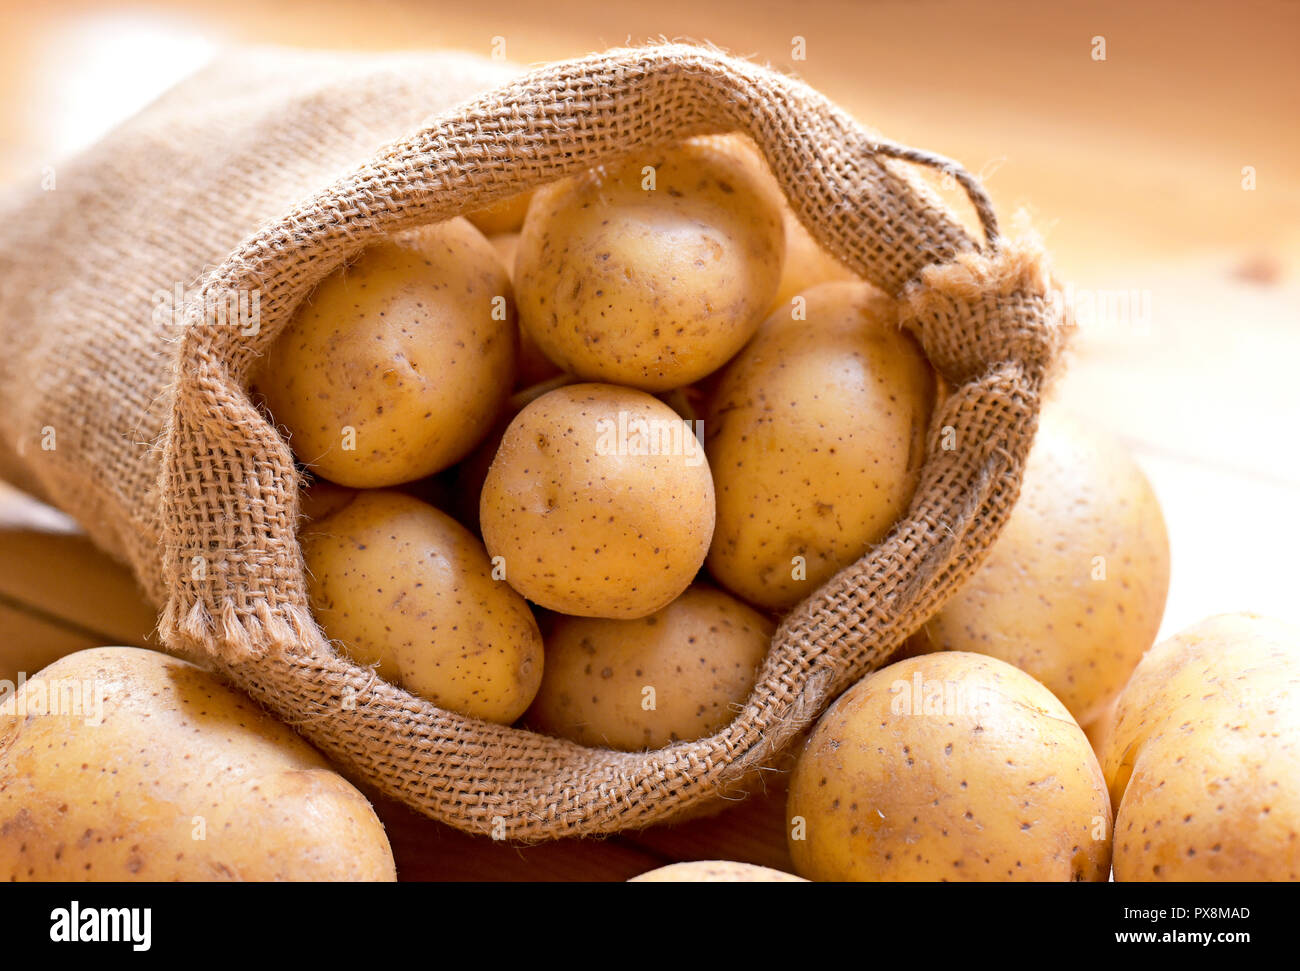 Fresh raw potatoes in a burlap sack. Earthy potato scene with sackcloth, arrangement on a wooden background, cooking ingredient. Stock Photo